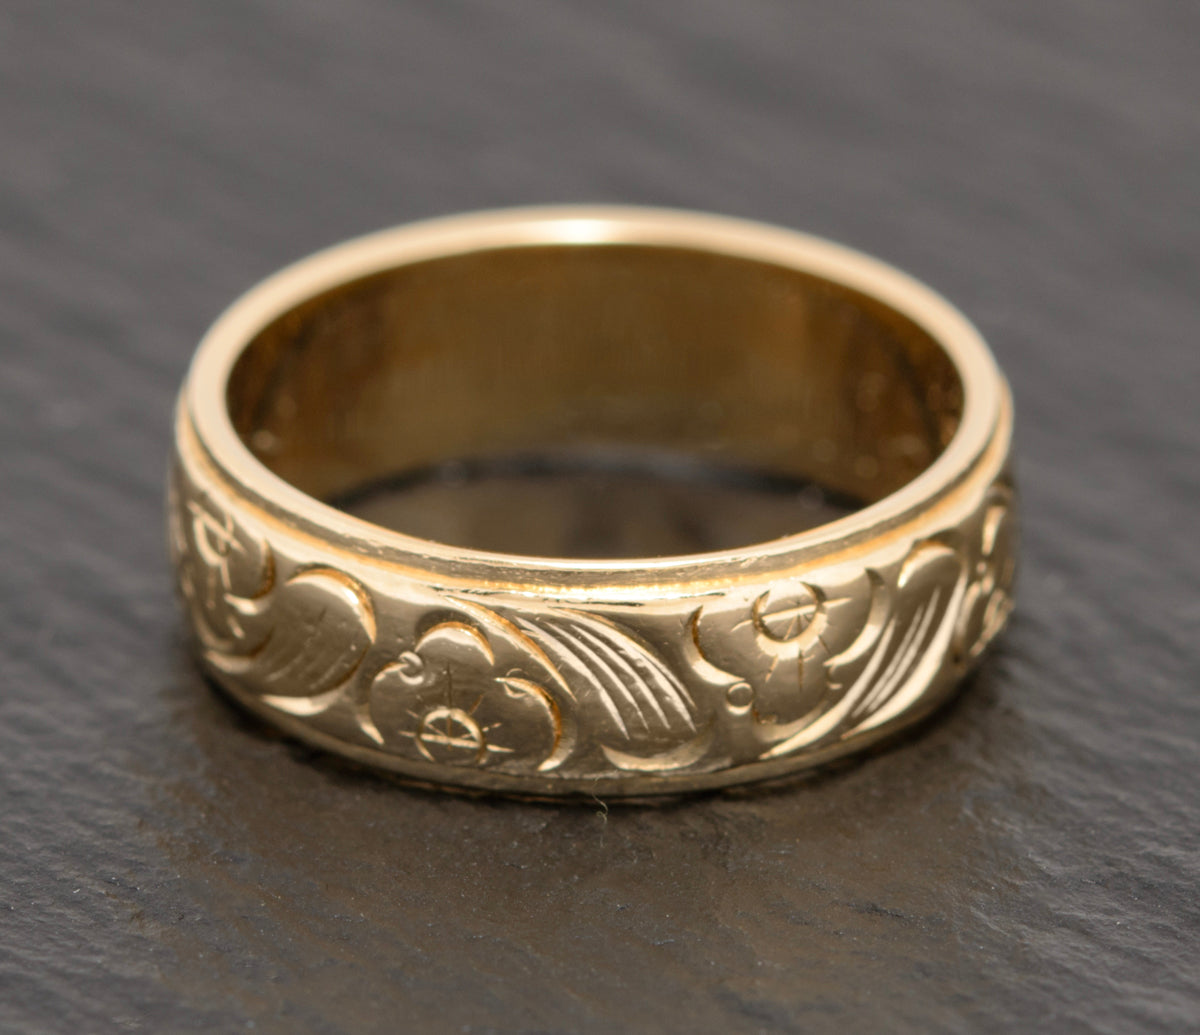 Vintage 14K 14ct Solid Gold Wedding Ring Band With Engraved Floral Design (A1583)